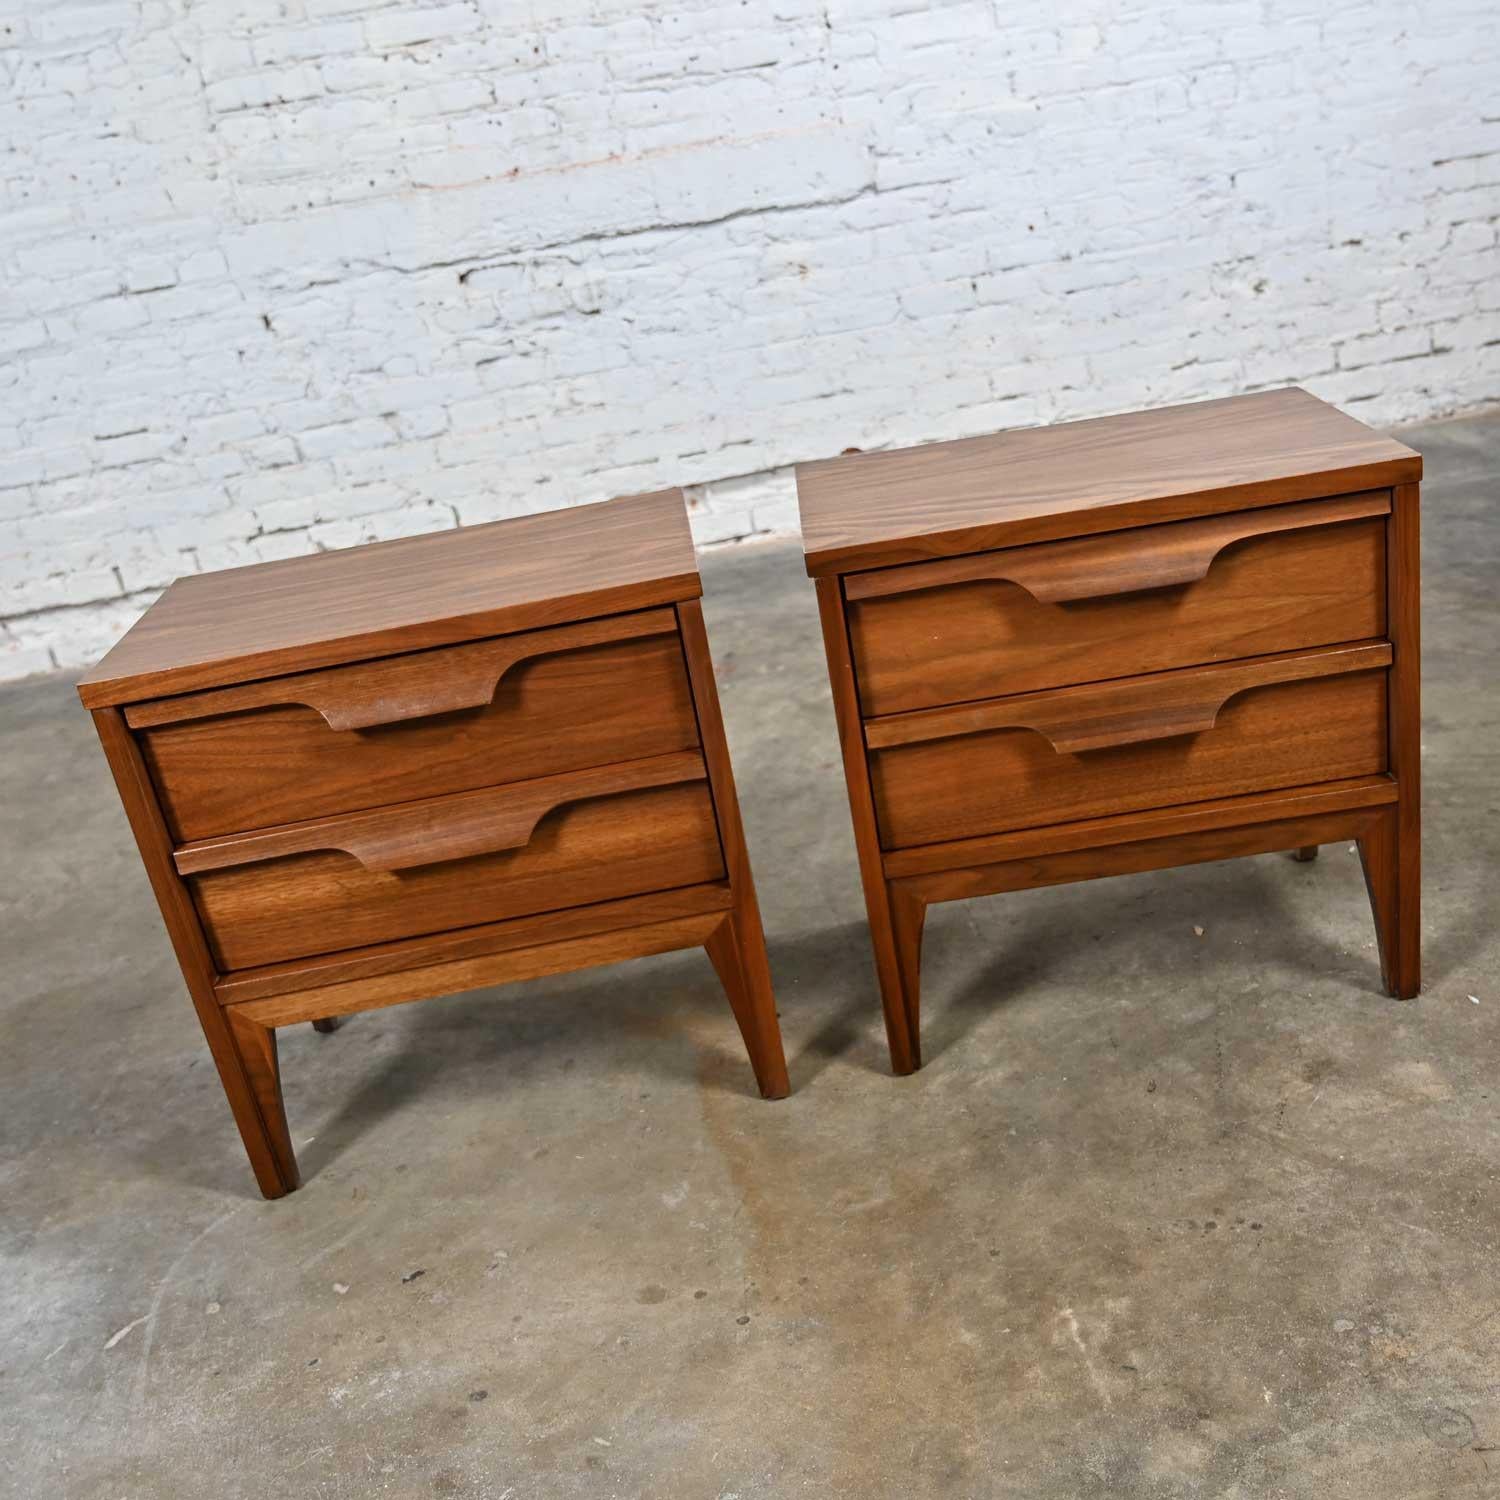 Handsome vintage Mid-Century Modern Johnson Carper Fashion Trend pair of walnut nightstands or end tables. Beautiful condition, keeping in mind that these are vintage and not new so will have signs of use and wear. Please see photos and zoom in for